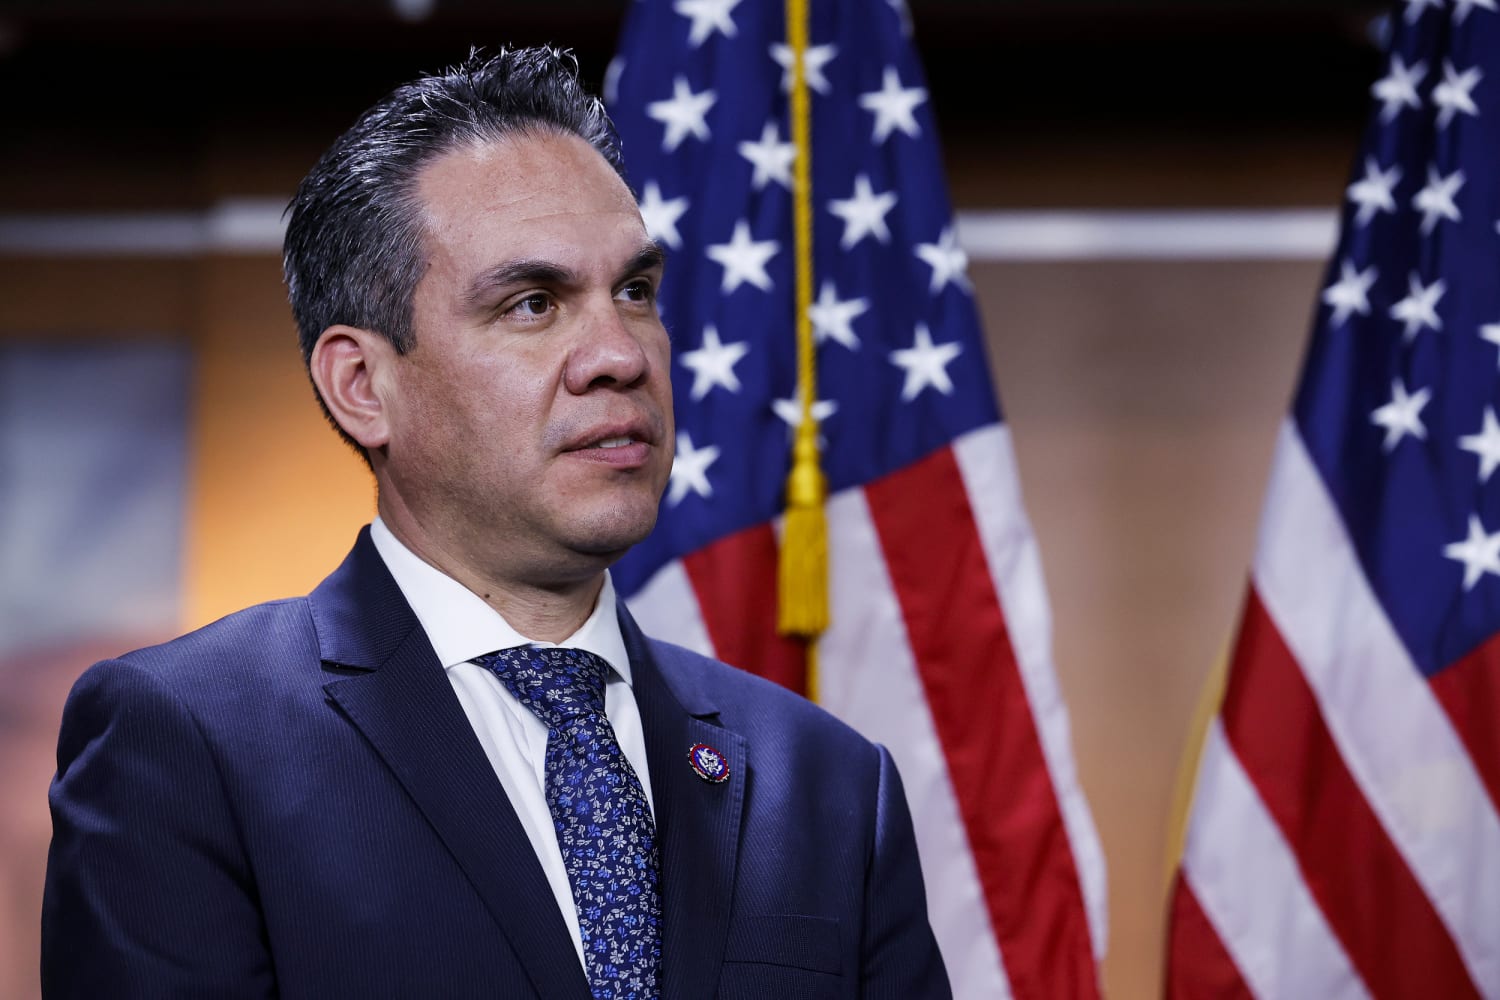 Congressman Pete Aguilar makes history as the highest ranking Latino in the House